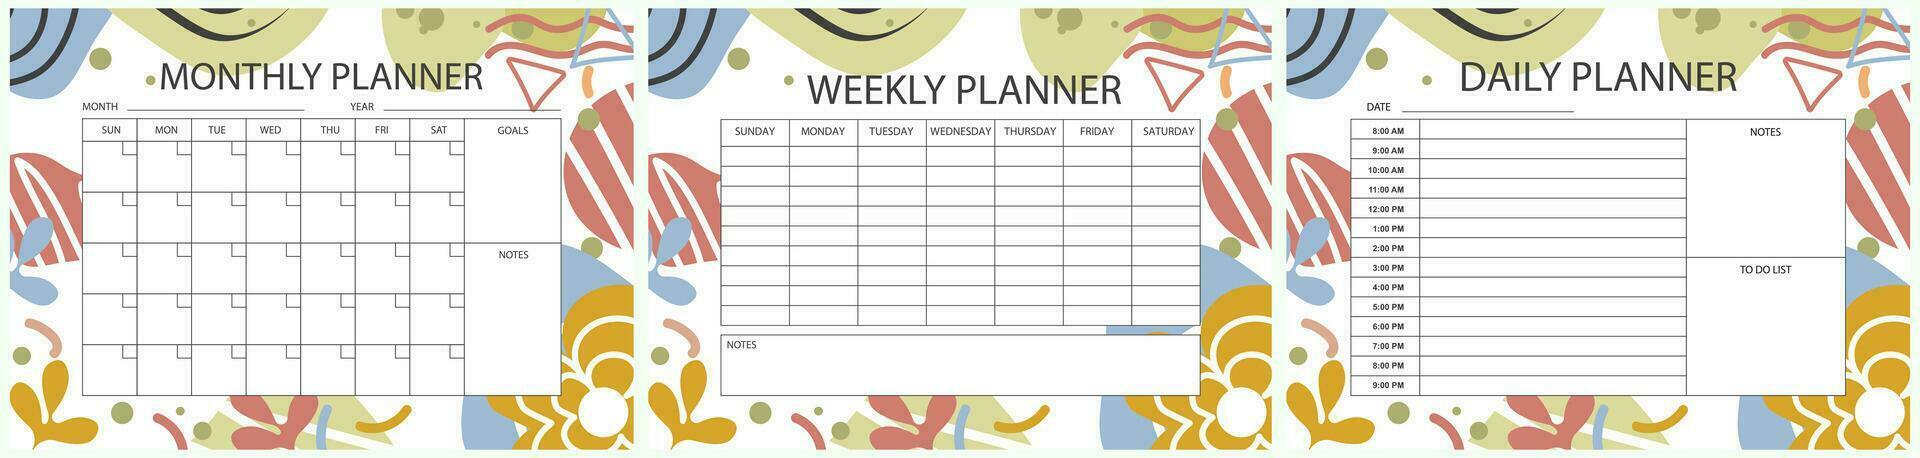 Modern Printable planner template set. Set of  Monthly, weekly, daily planner template with notes, goals and to do list. Schedule, Agenda, planner Overview, Journal, Organizer, Vector illustration